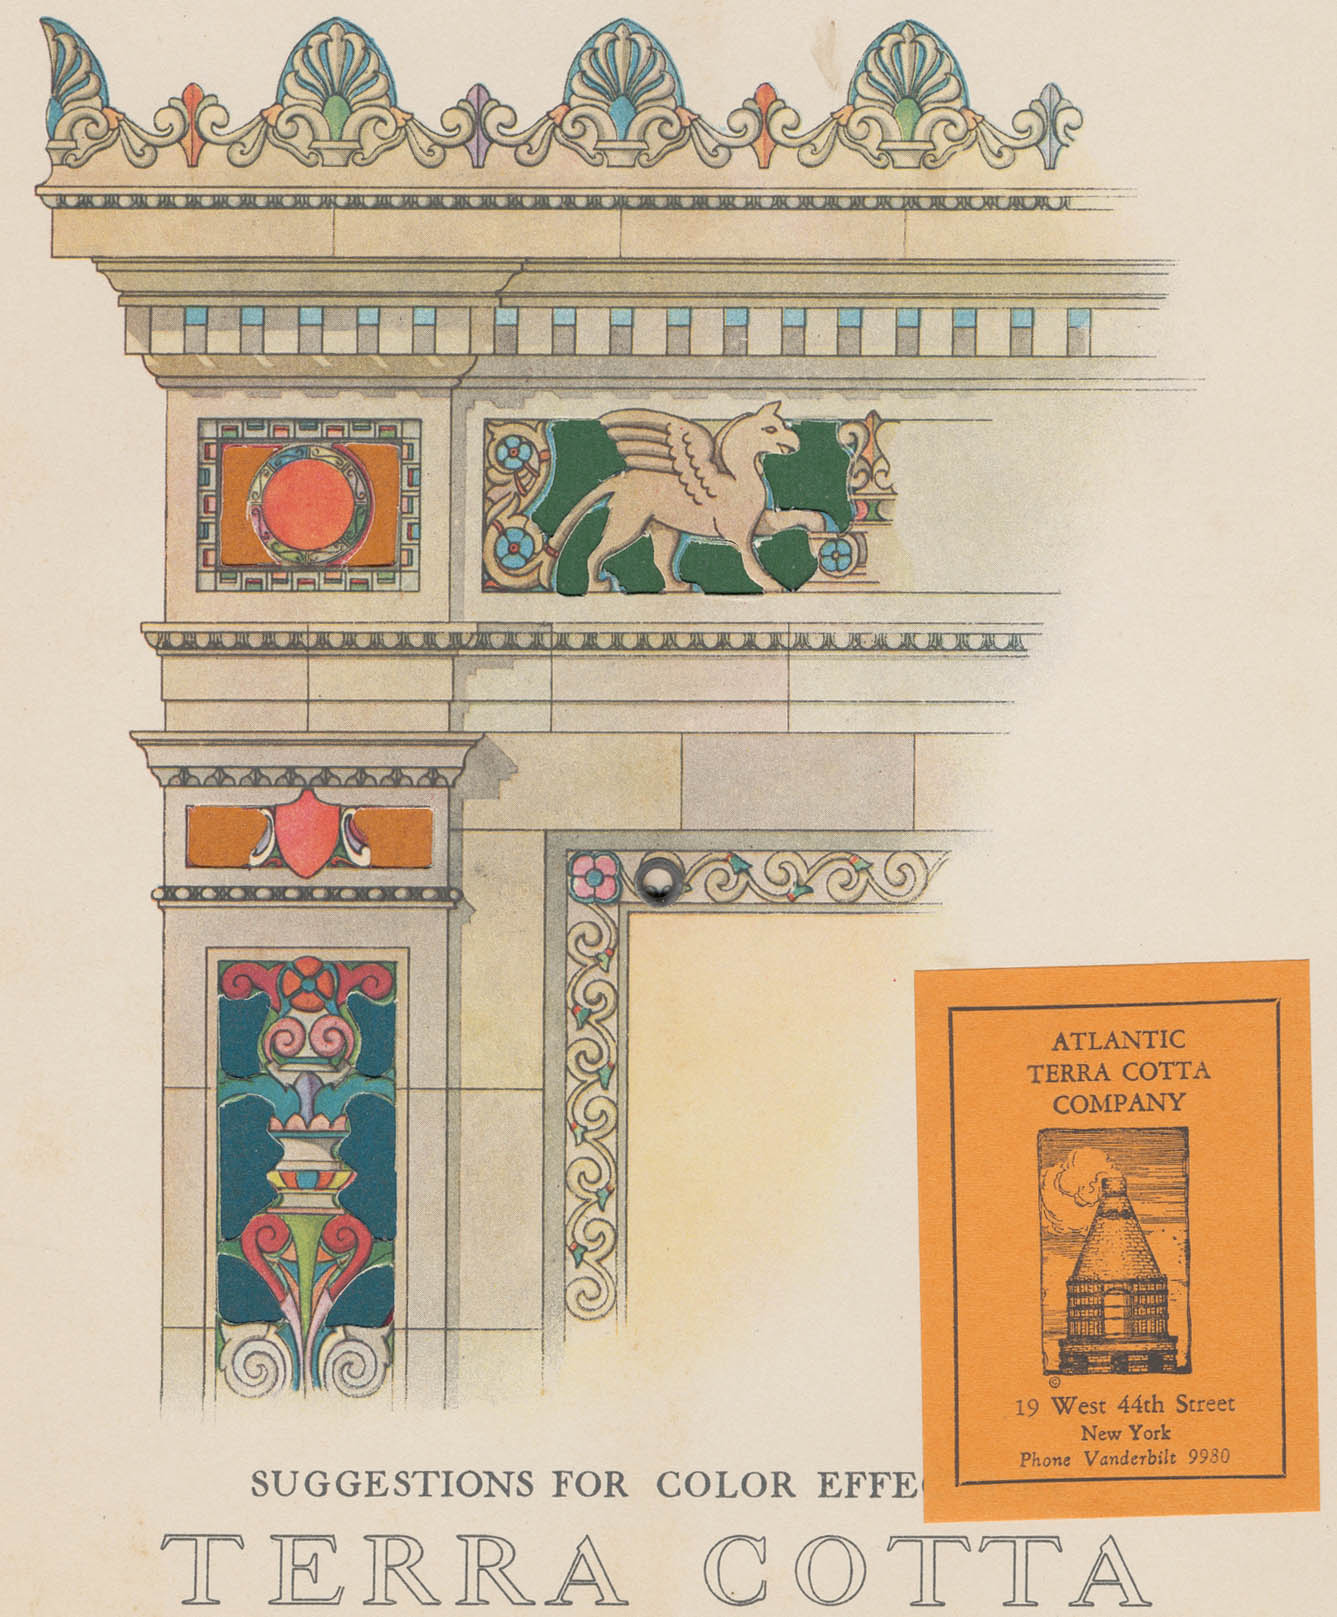 Image is of a Terra Cotta brochure entitled "Suggestions for Color Effect." Brochure includes an illustration of an elaborately decorated building. A stamp on the brochure reads "Atlantic Terra Cotta Company; 19 West 44th Street; New York; Phone Vanderbilt 9980" 